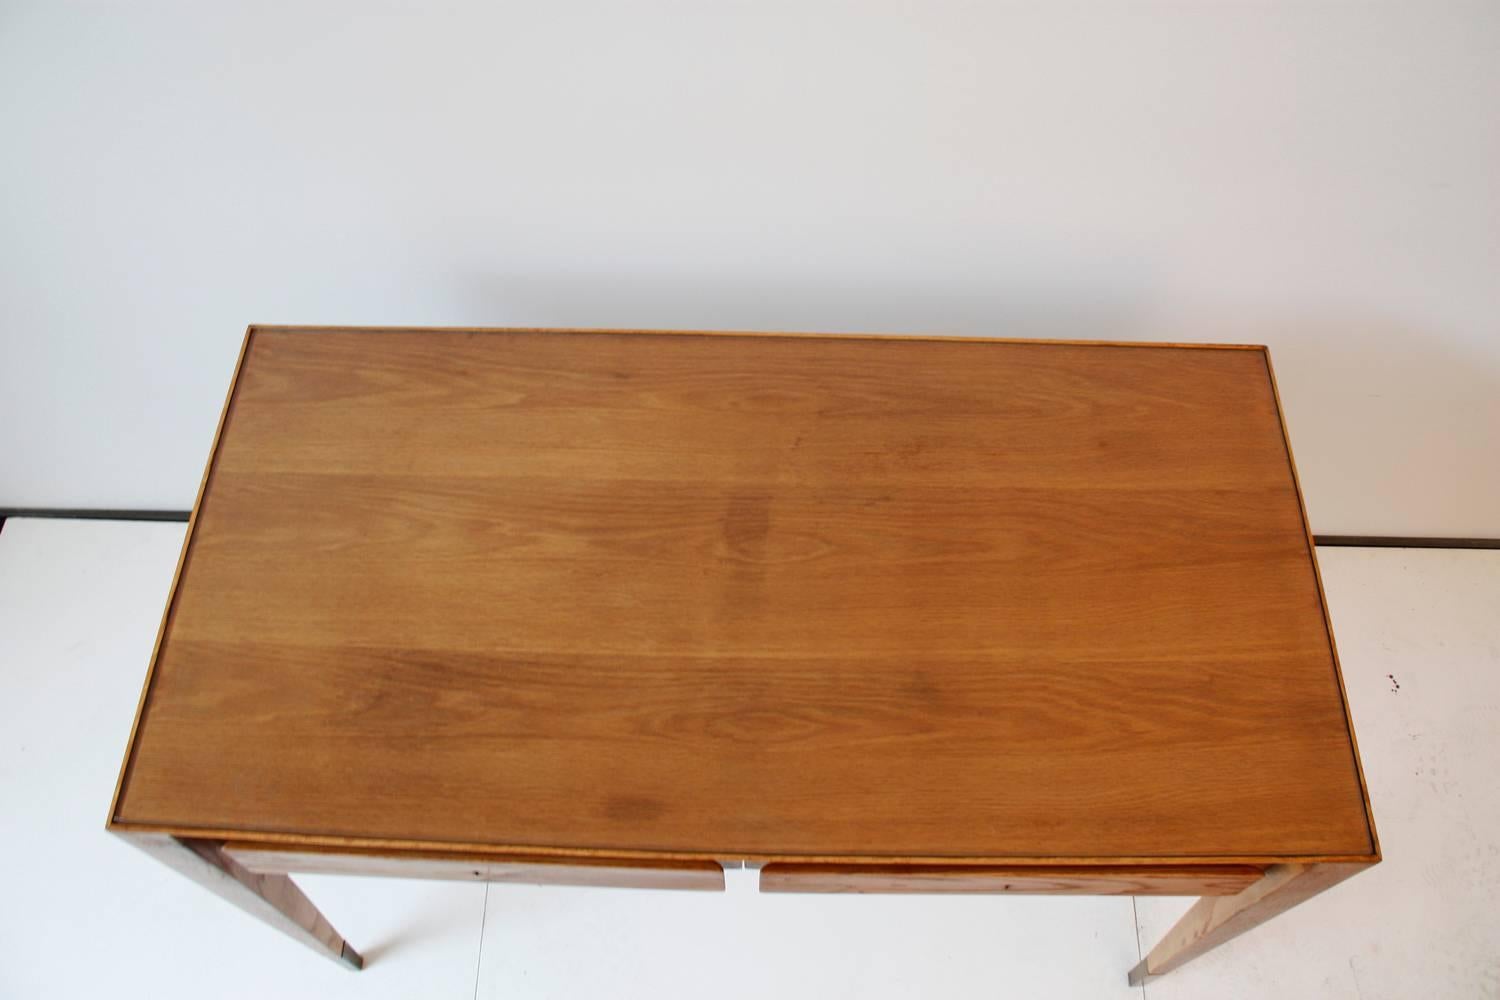 Italian Vintage Clear Oak Desk with Drawers by Gio Ponti, circa 1950 In Good Condition For Sale In Belgium, Brussels